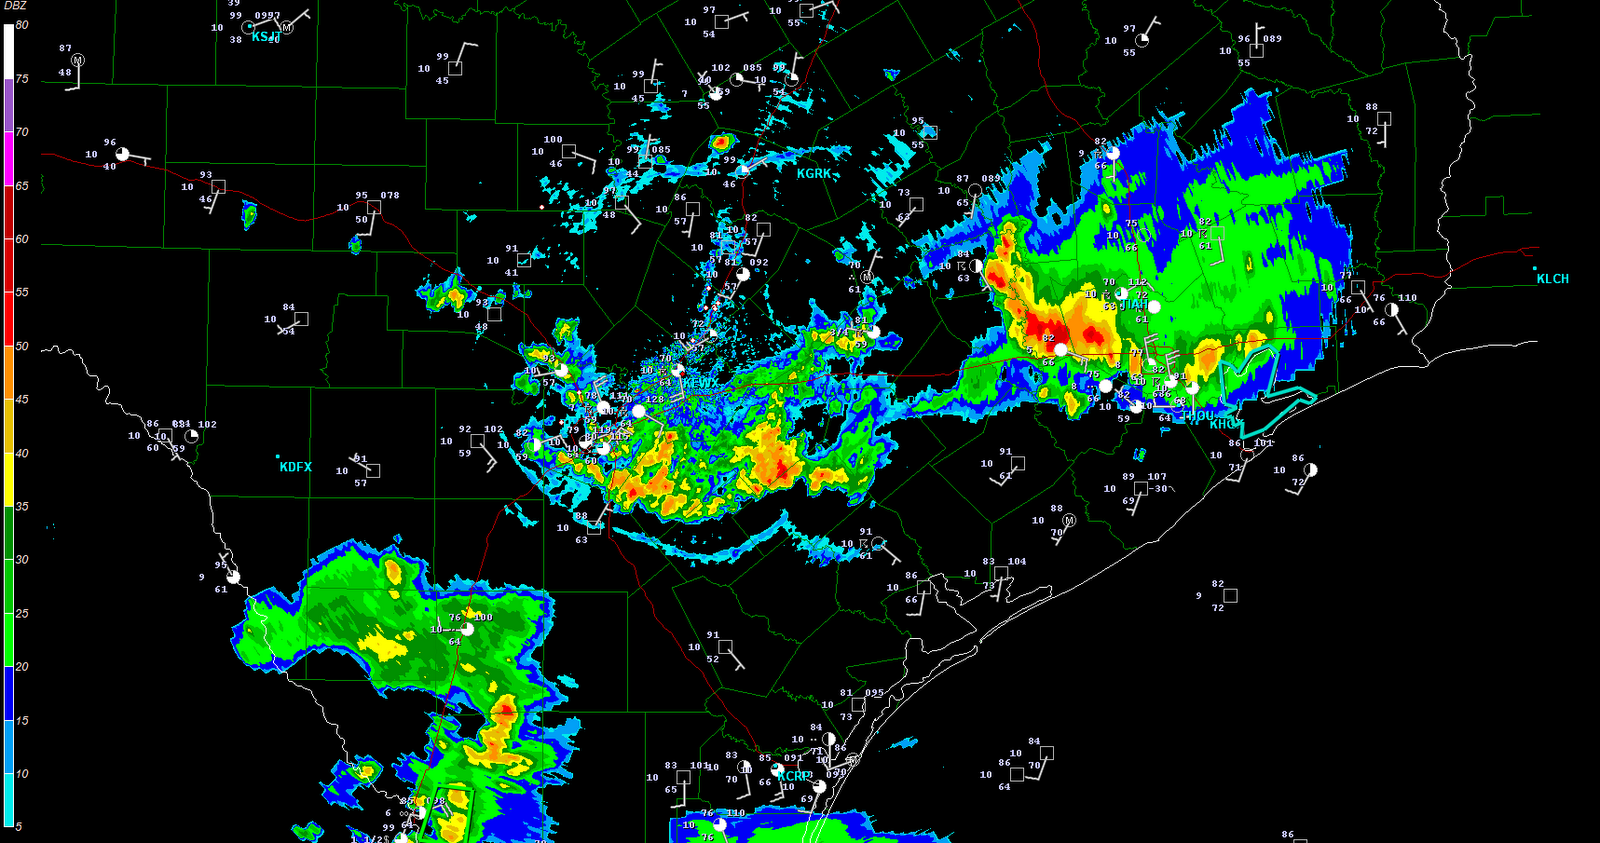 The Original Weather Blog: Cool Outflow Boundary Interactions Across Central Texas